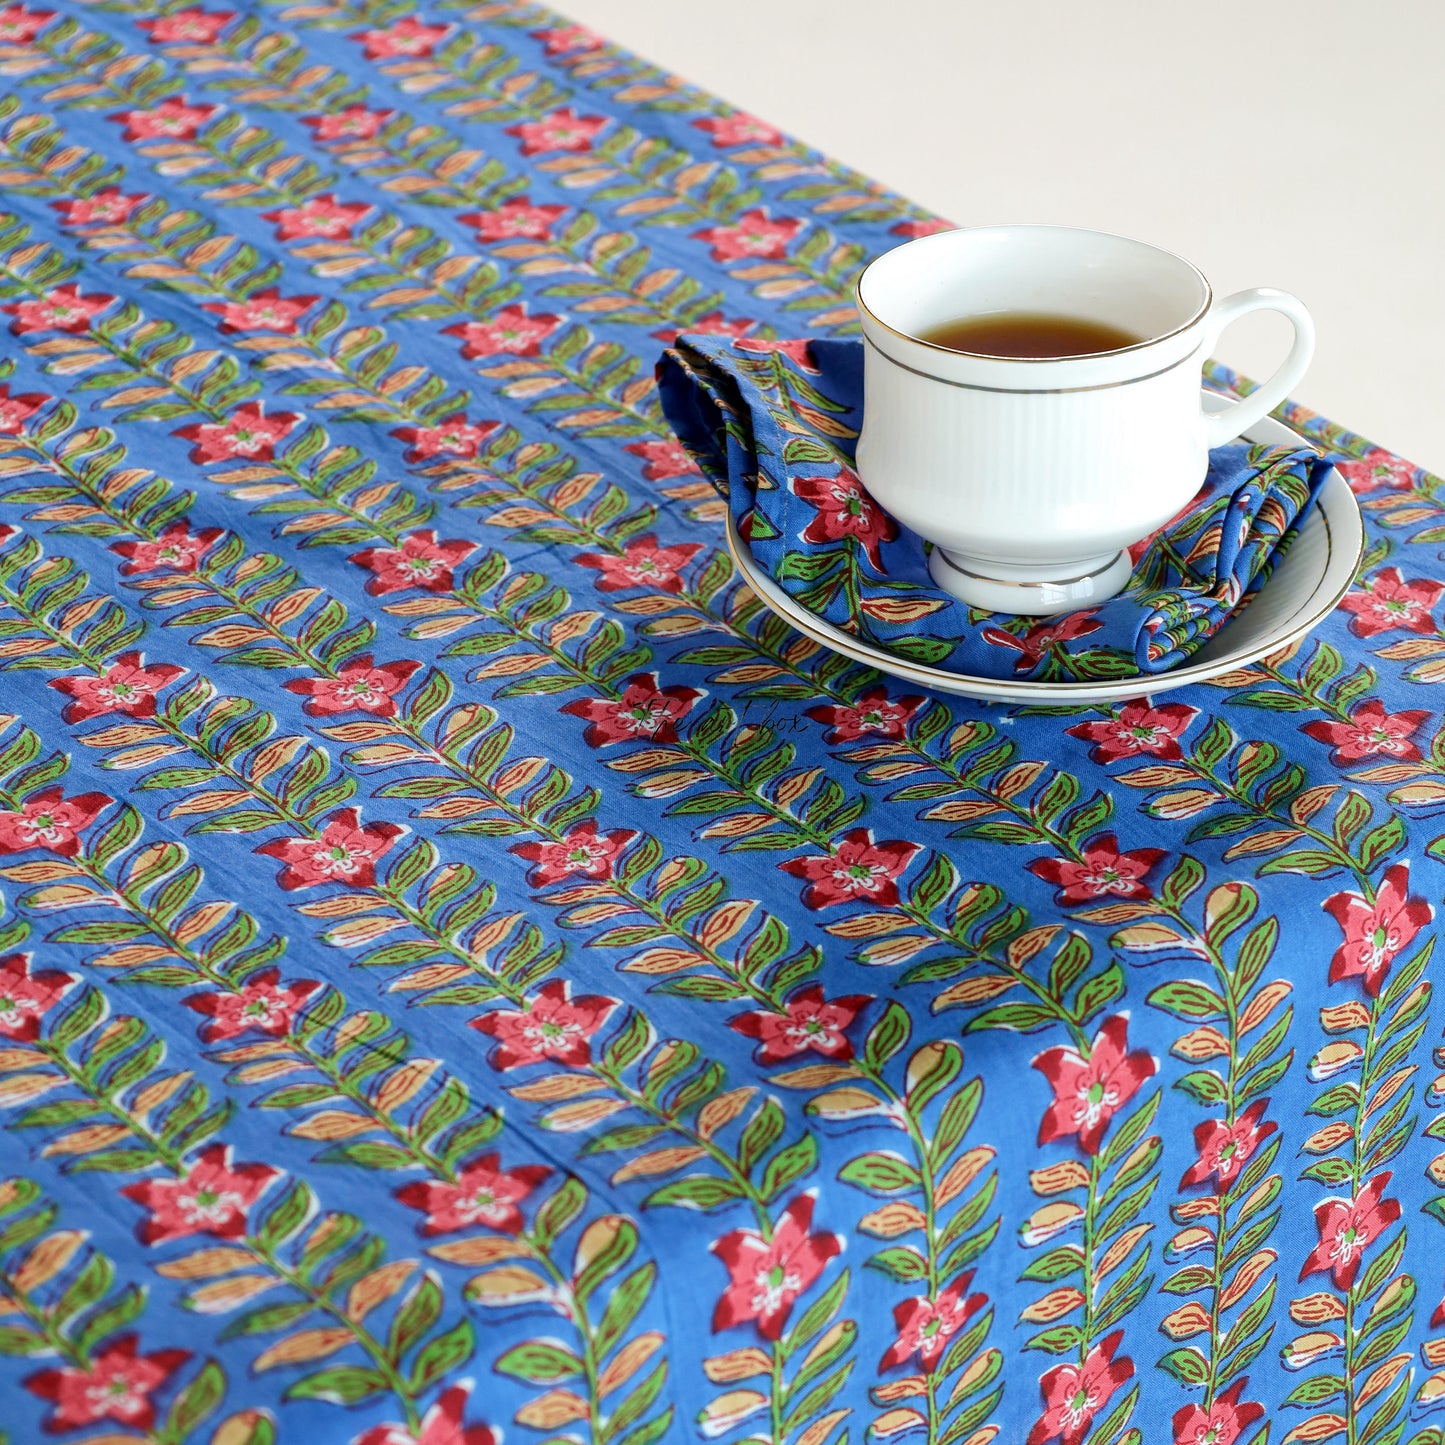 Beautiful Blue Floral Cotton Printed Table Covers for Your Dining, Living Room